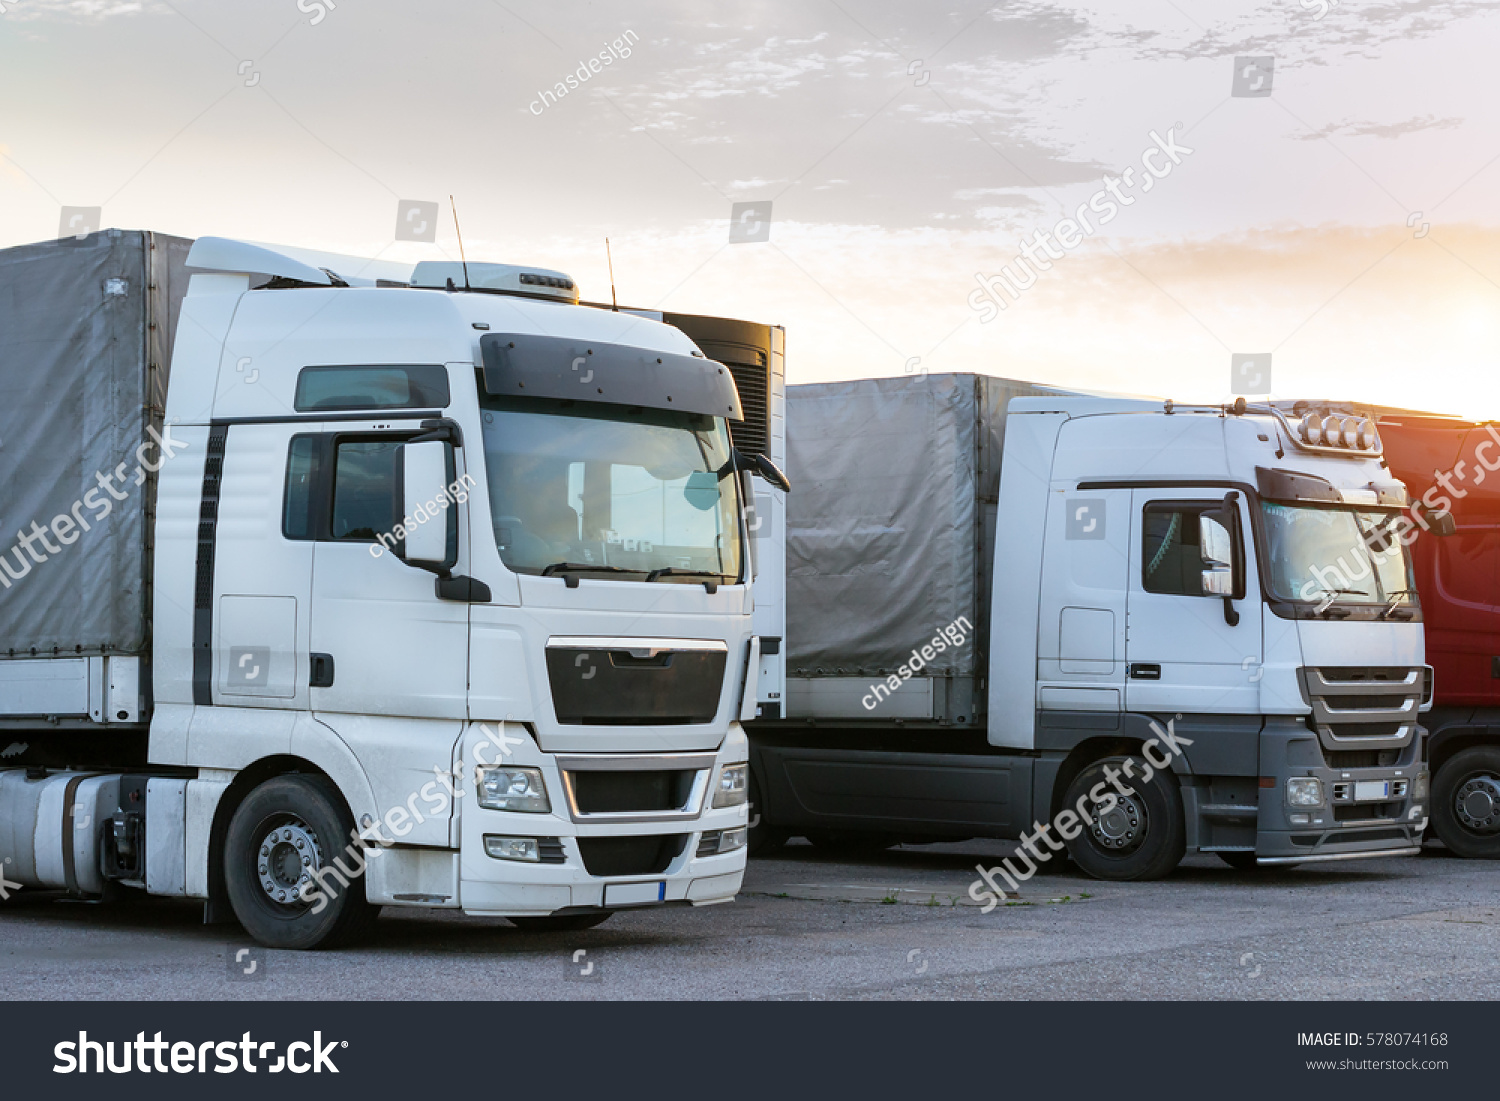 Narva, Estonia - August 20, 2016: Heavy trucks loaded with goods trailers, parked in waiting area on state border crossing. International hard transportation and logistics. Transport infrastructure #578074168